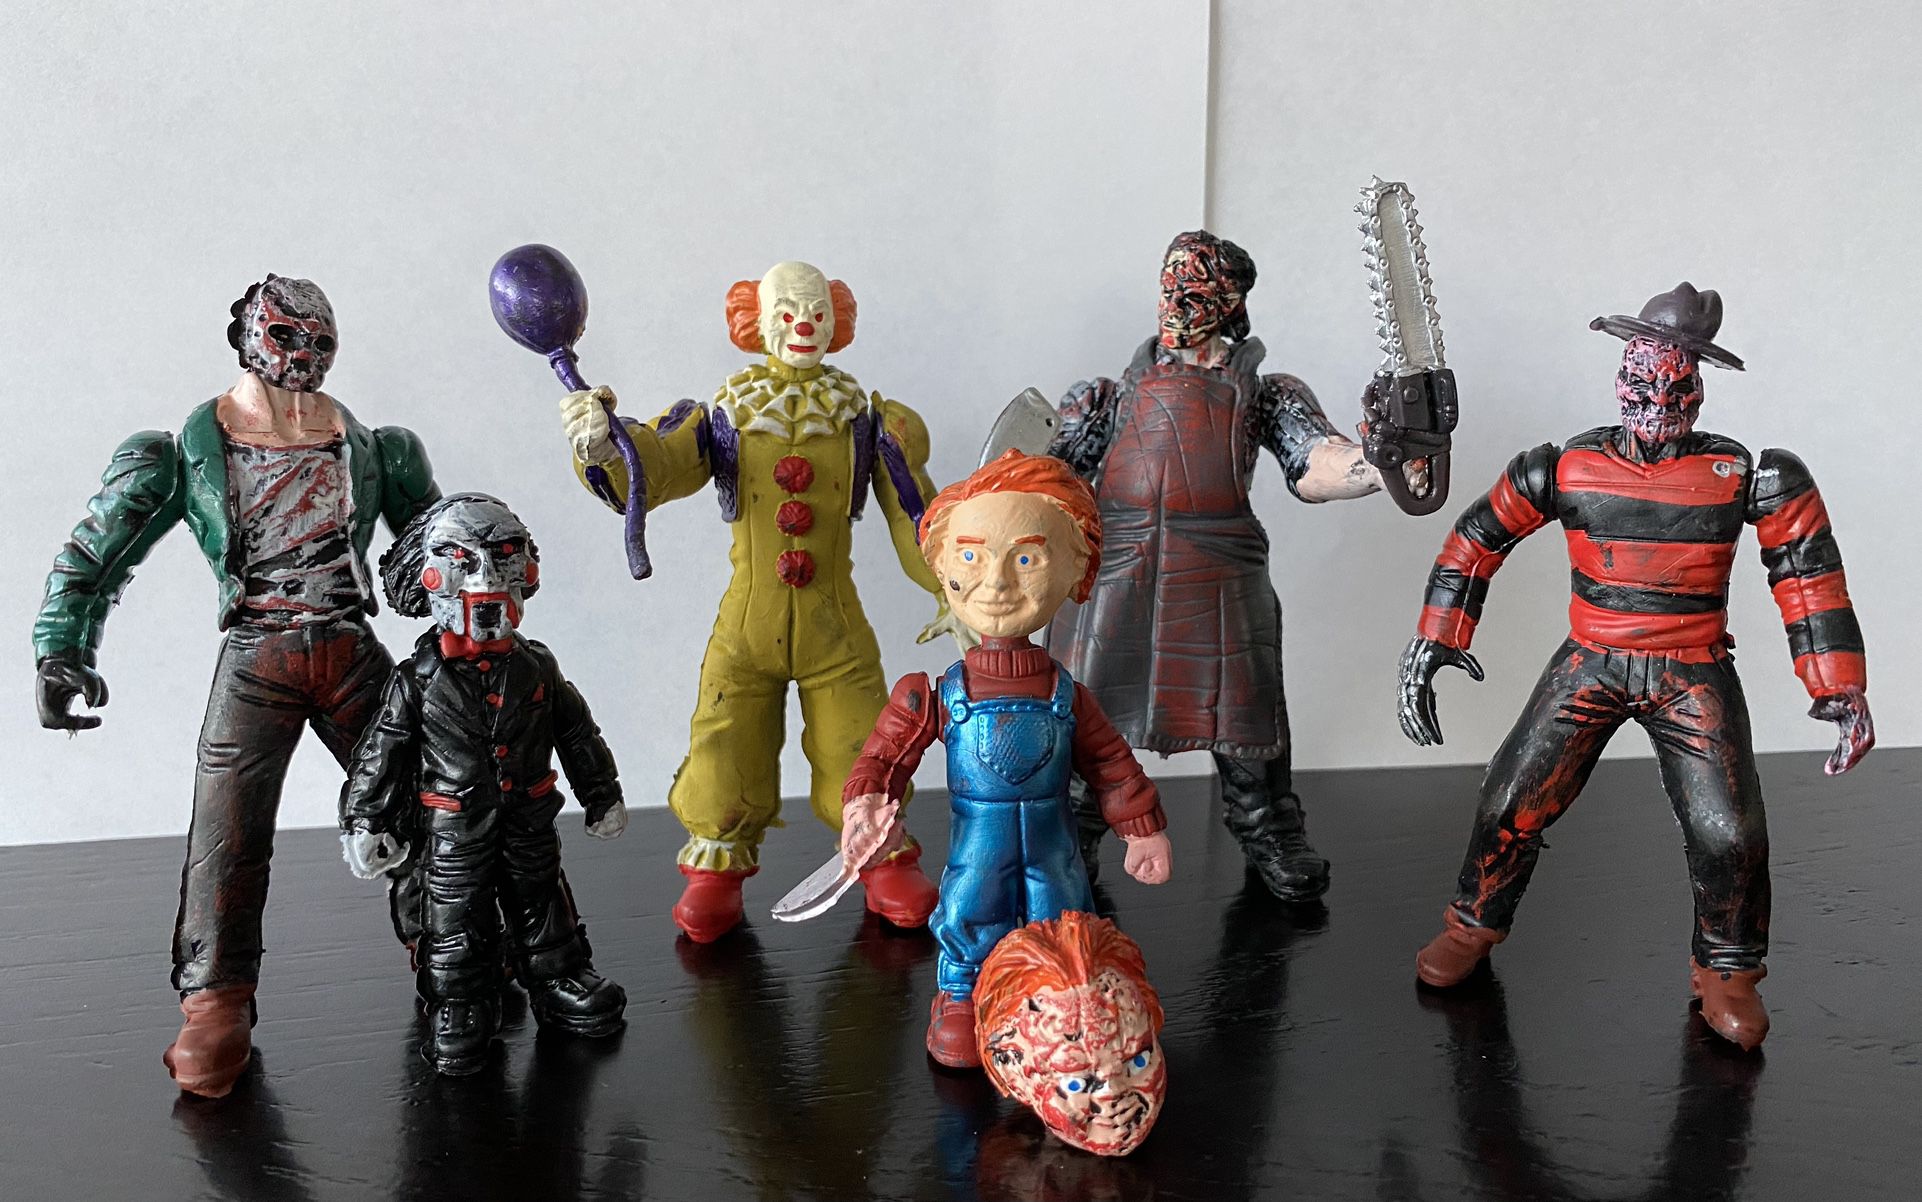 UNIQUE Jason/Chucky/Leatherface/Pennywise IT/Saw/Freddy Krueger Horror Action Figure Set Toys